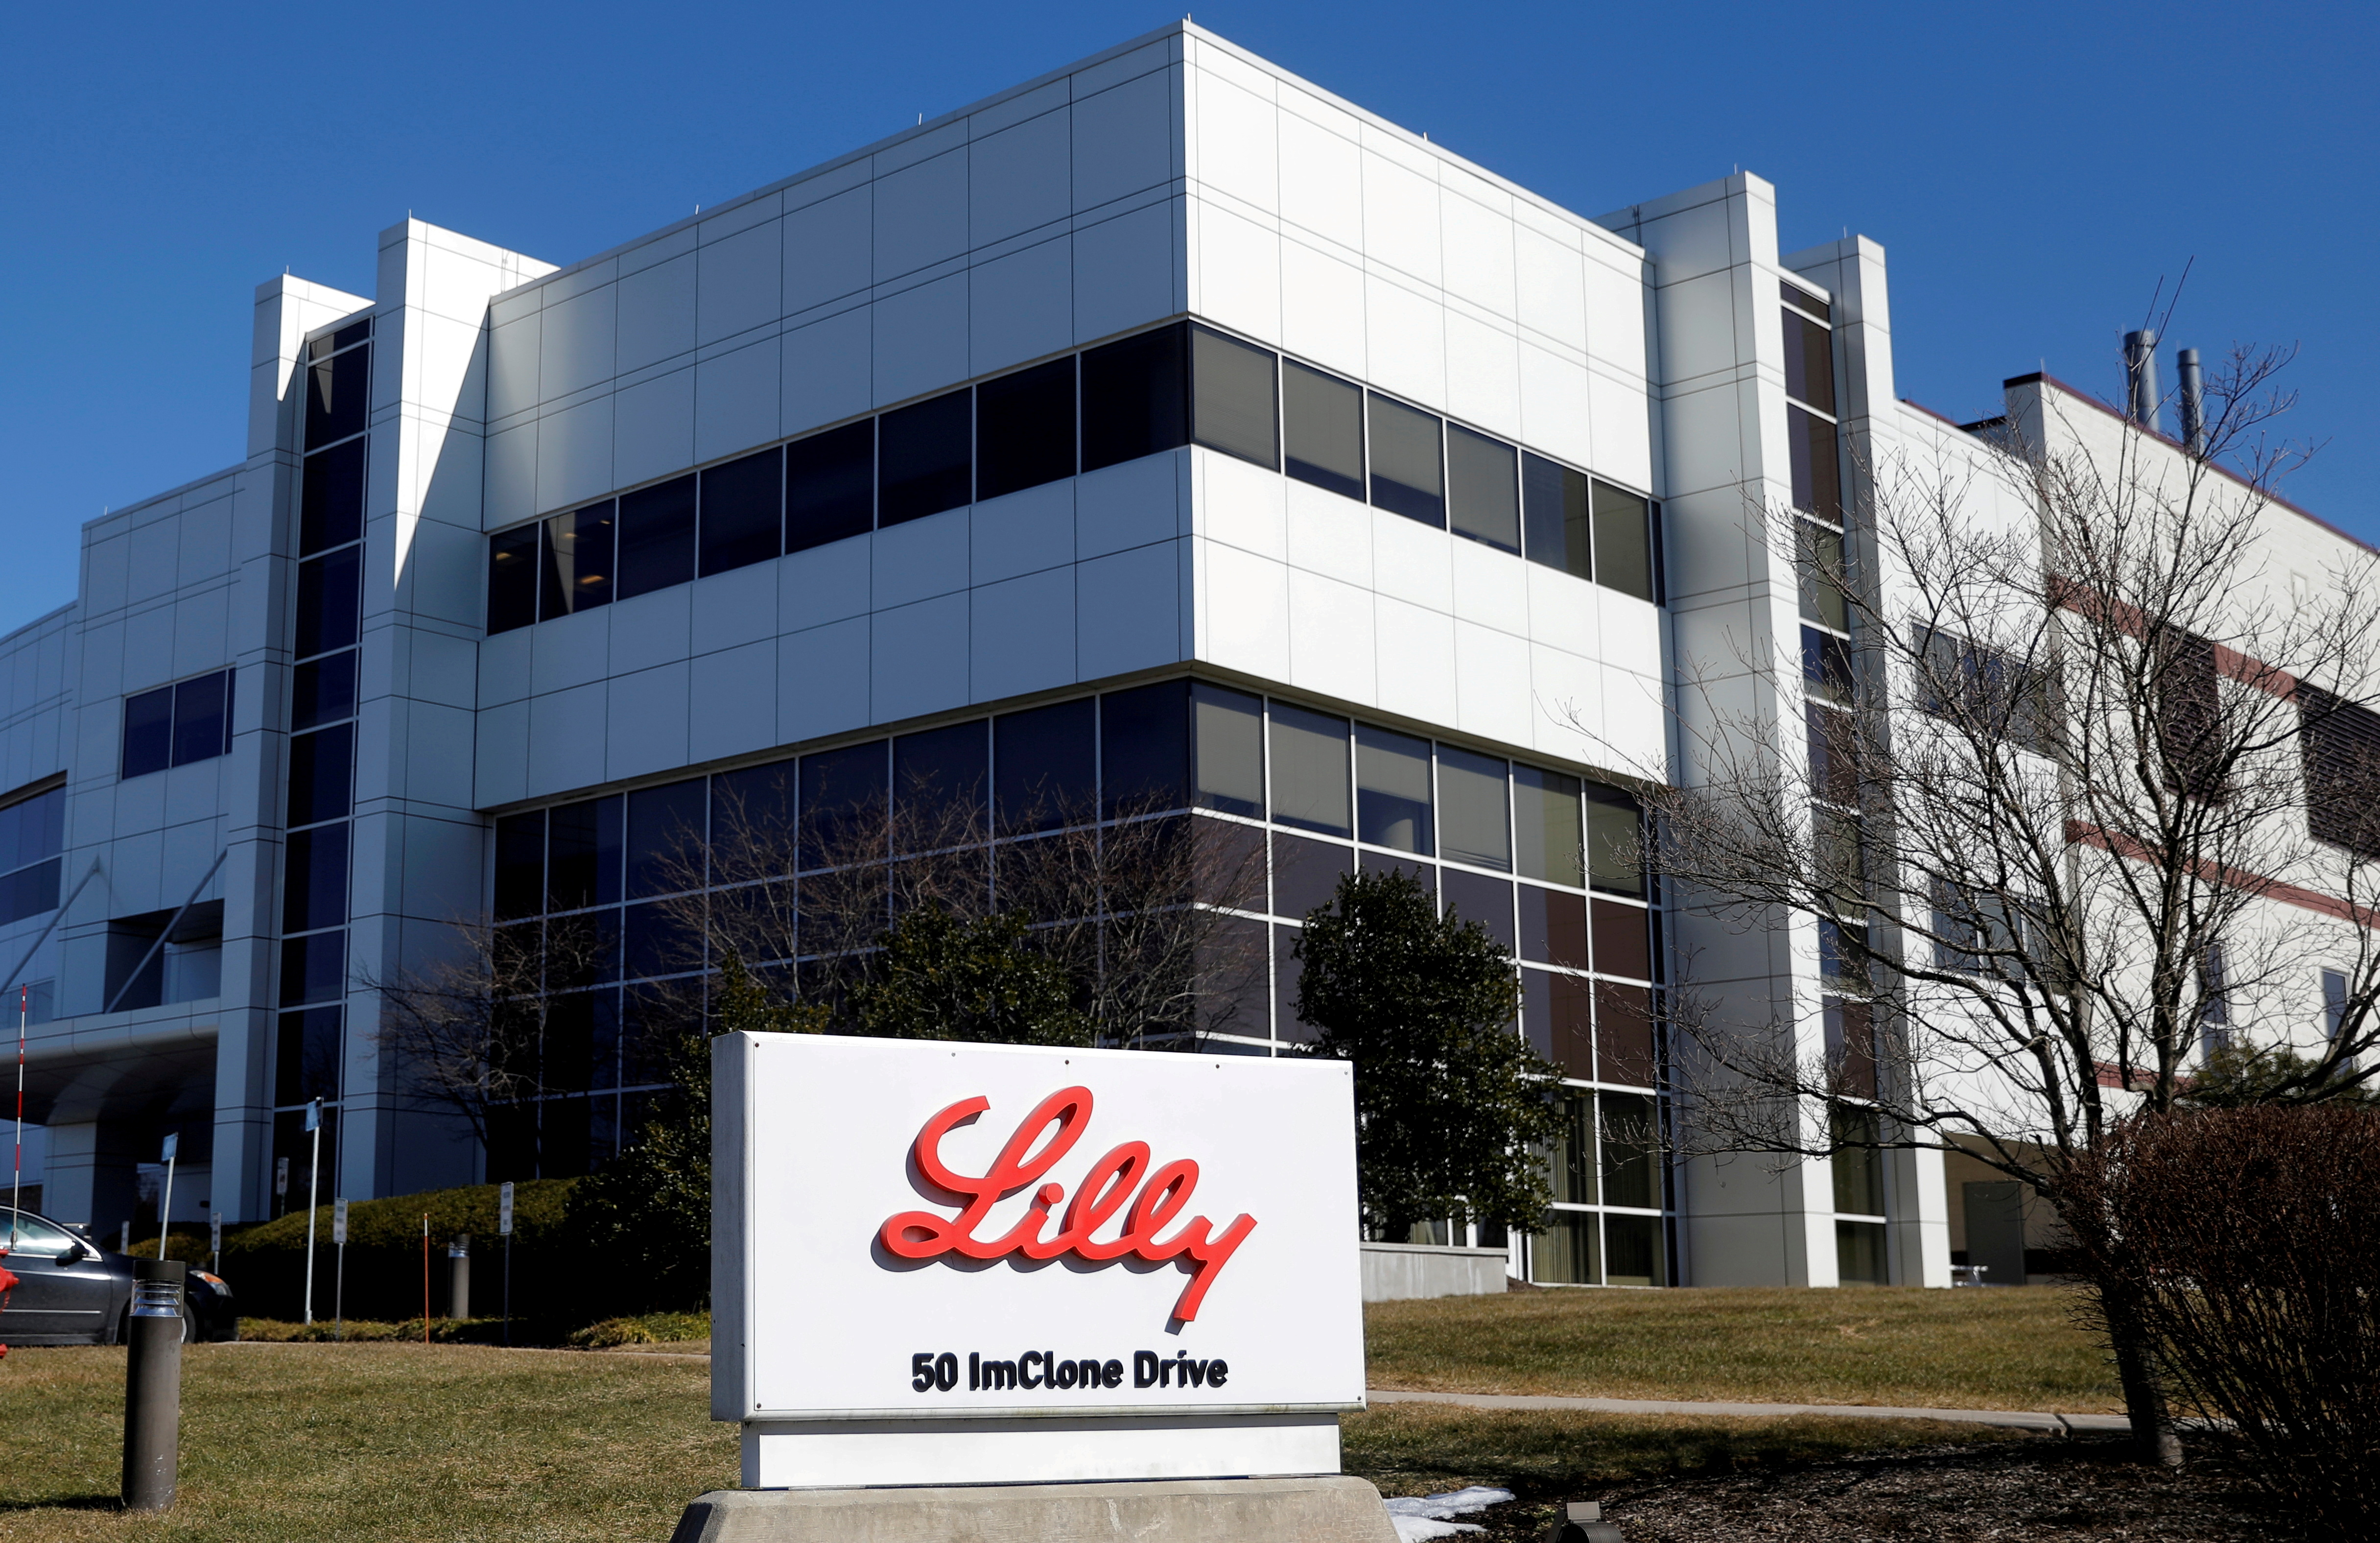 An Eli Lilly and Company pharmaceutical manufacturing plant is pictured at 50 ImClone Drive in Branchburg, New Jersey, March 5, 2021.  REUTERS/Mike Segar/File Photo